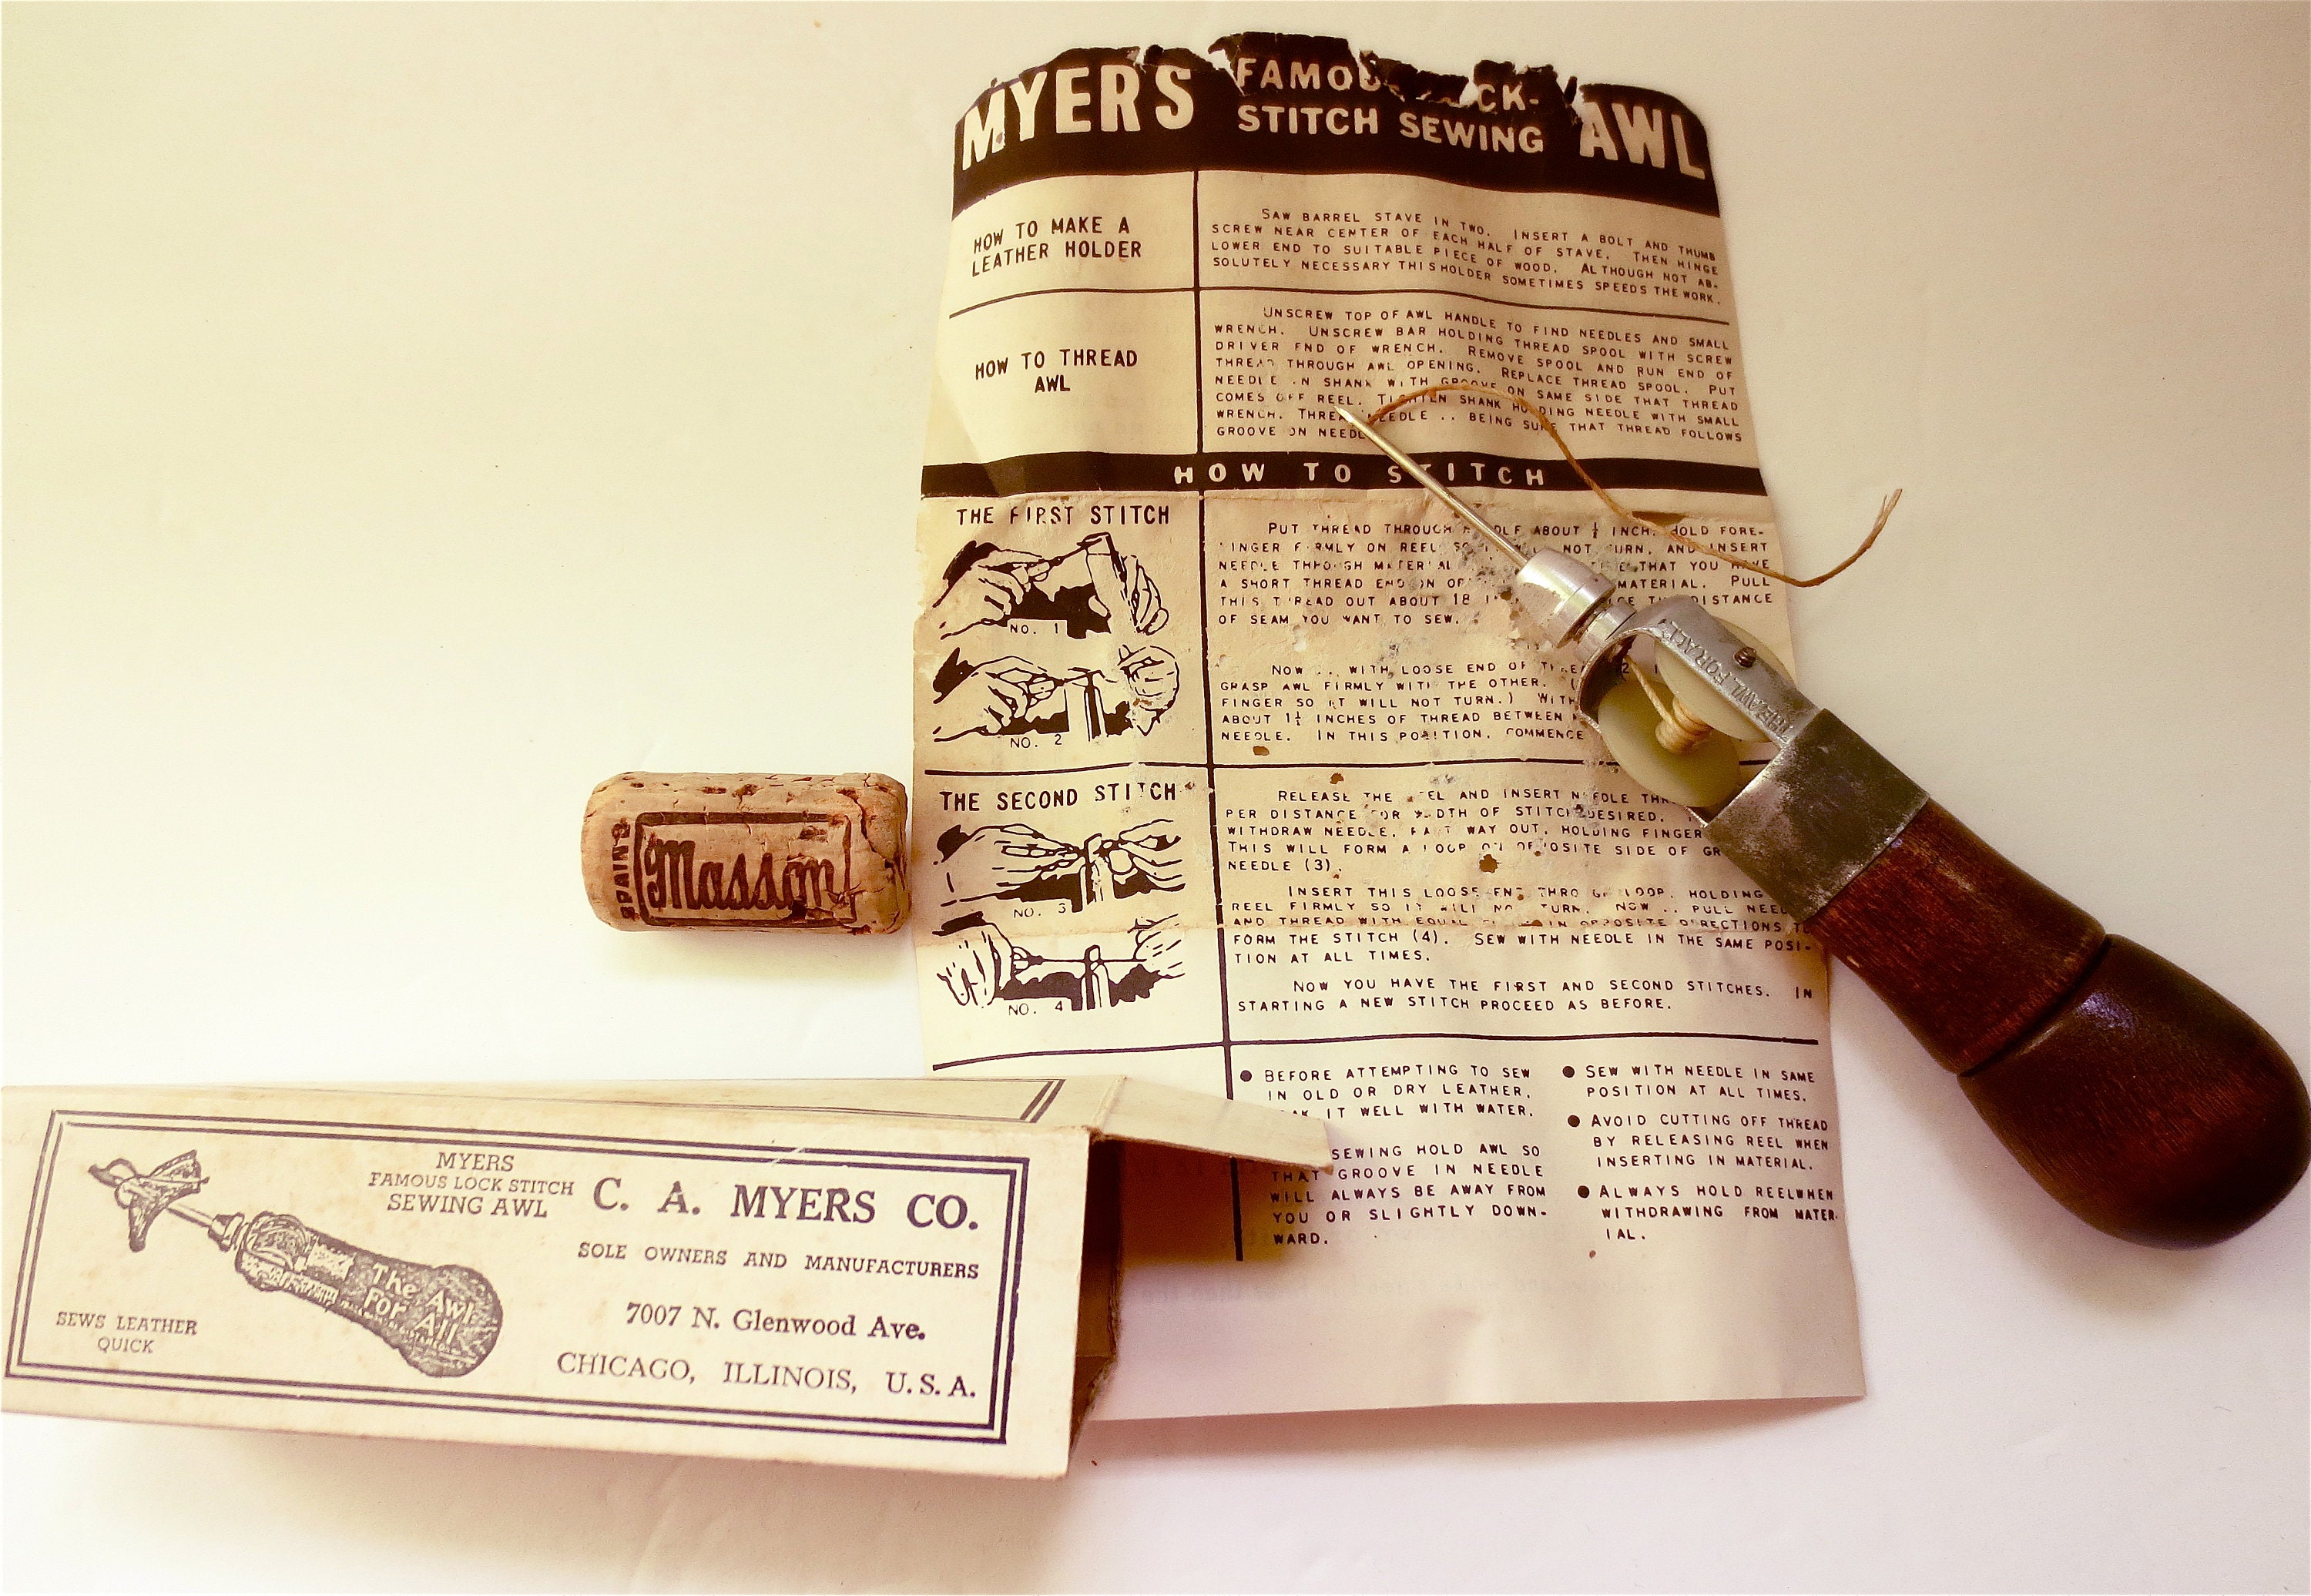 Myers Famous Lock Stitch Leather Sewing Awl C. A. Myers CO. w/Box &  Instructions